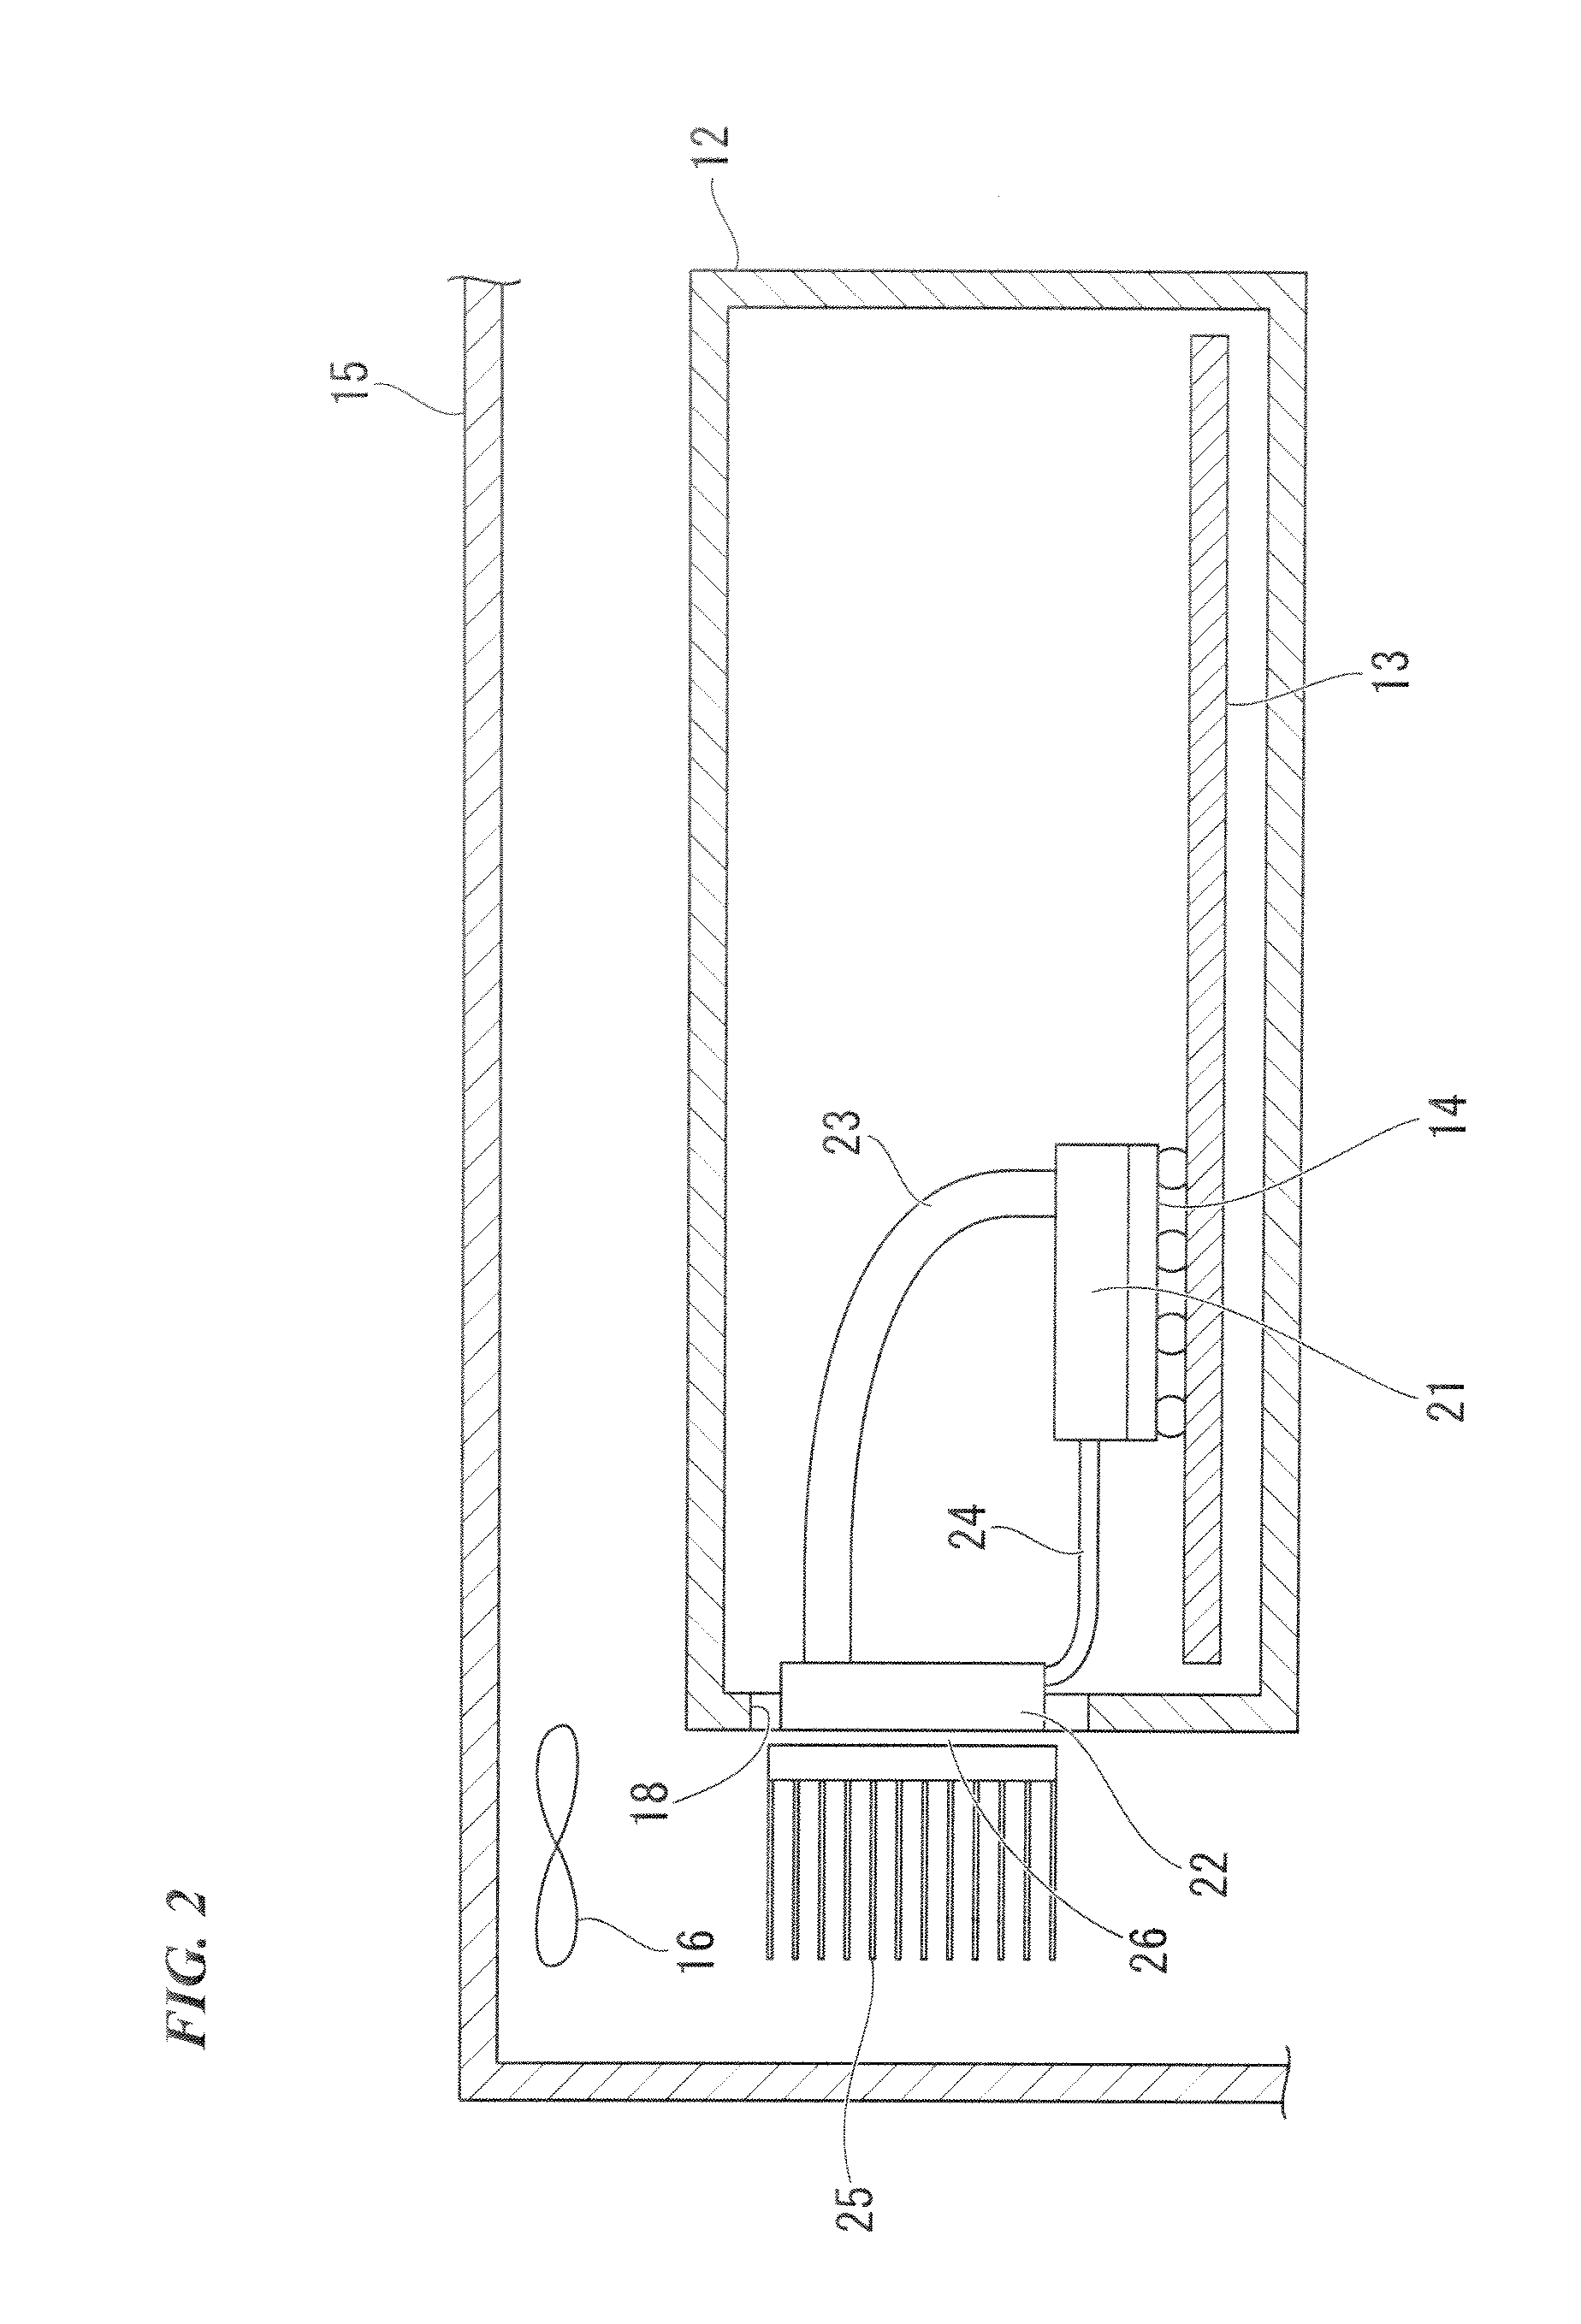 Heat conveying structure for electronic device